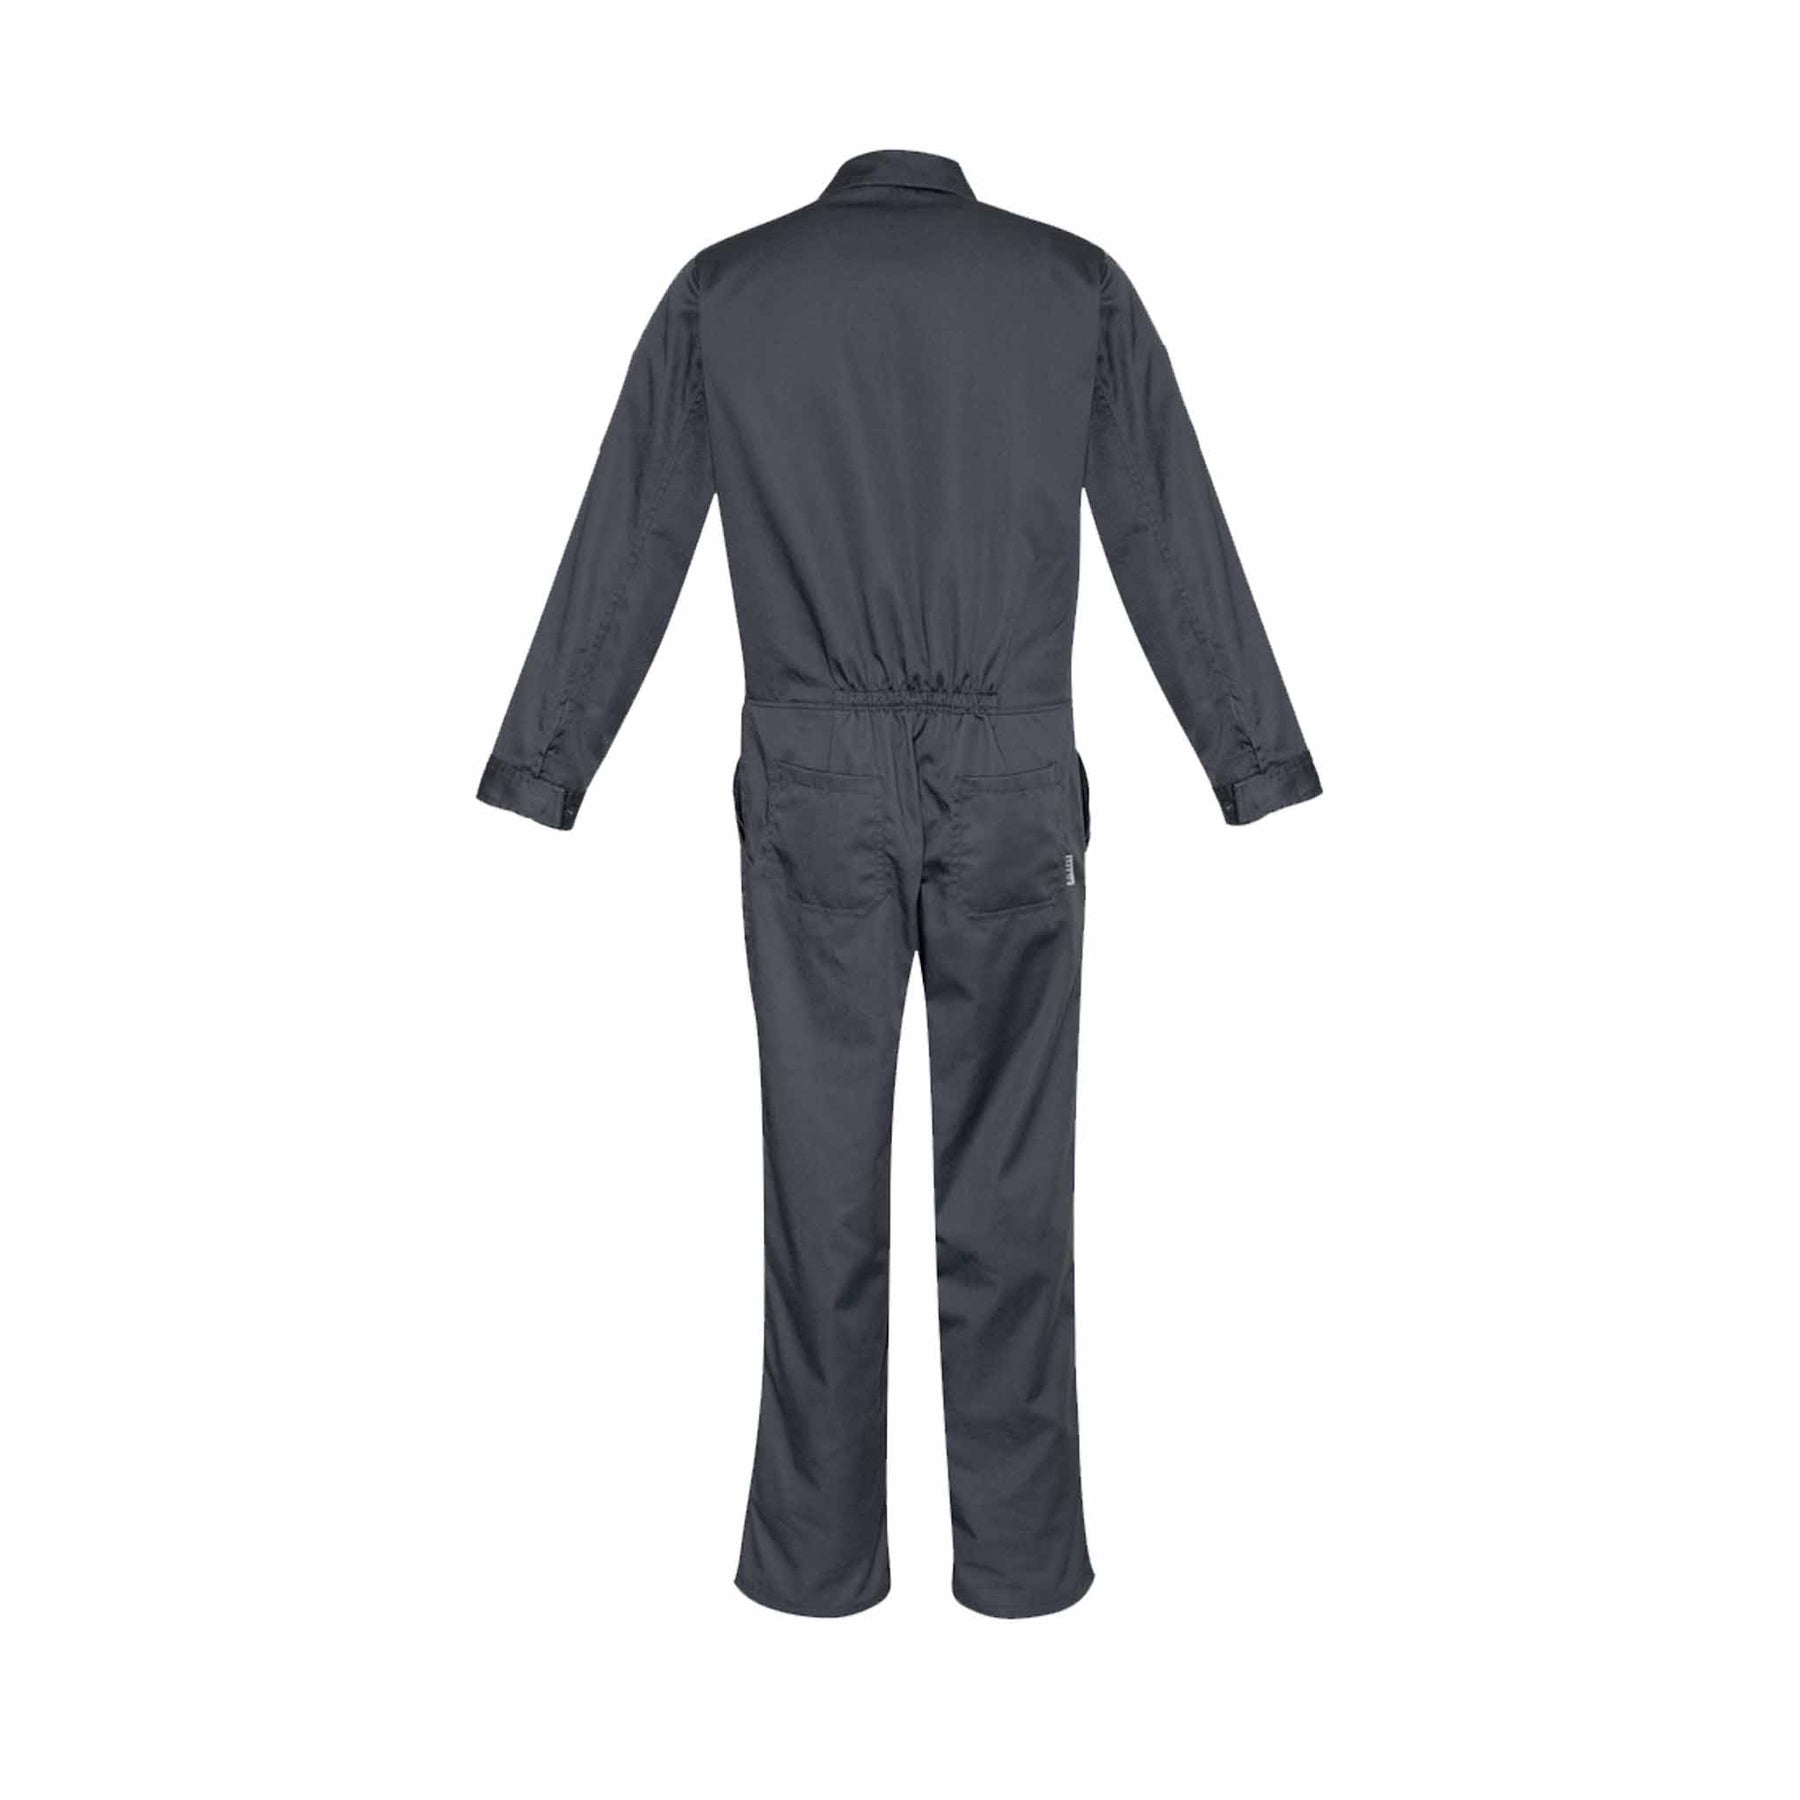 Long sleeve charcoal overalls back view